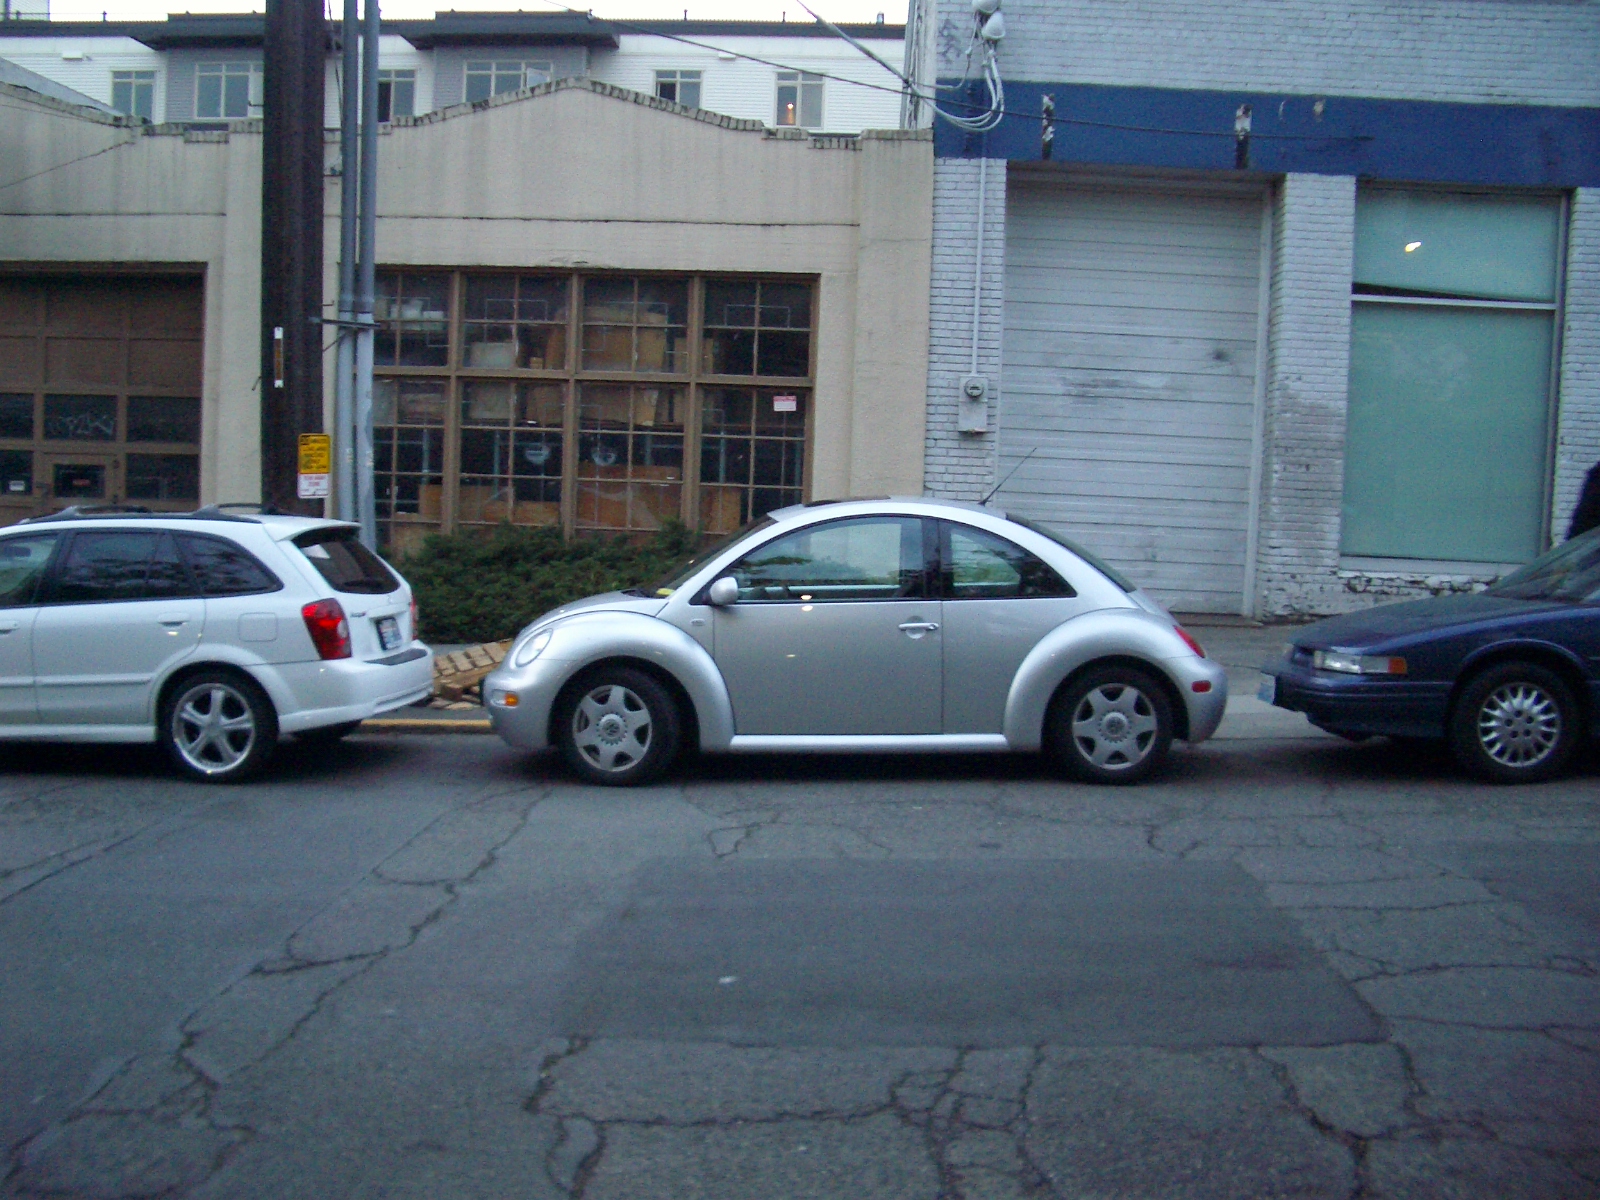 File:Parallel Parking cars.jpg - Wikimedia Commons